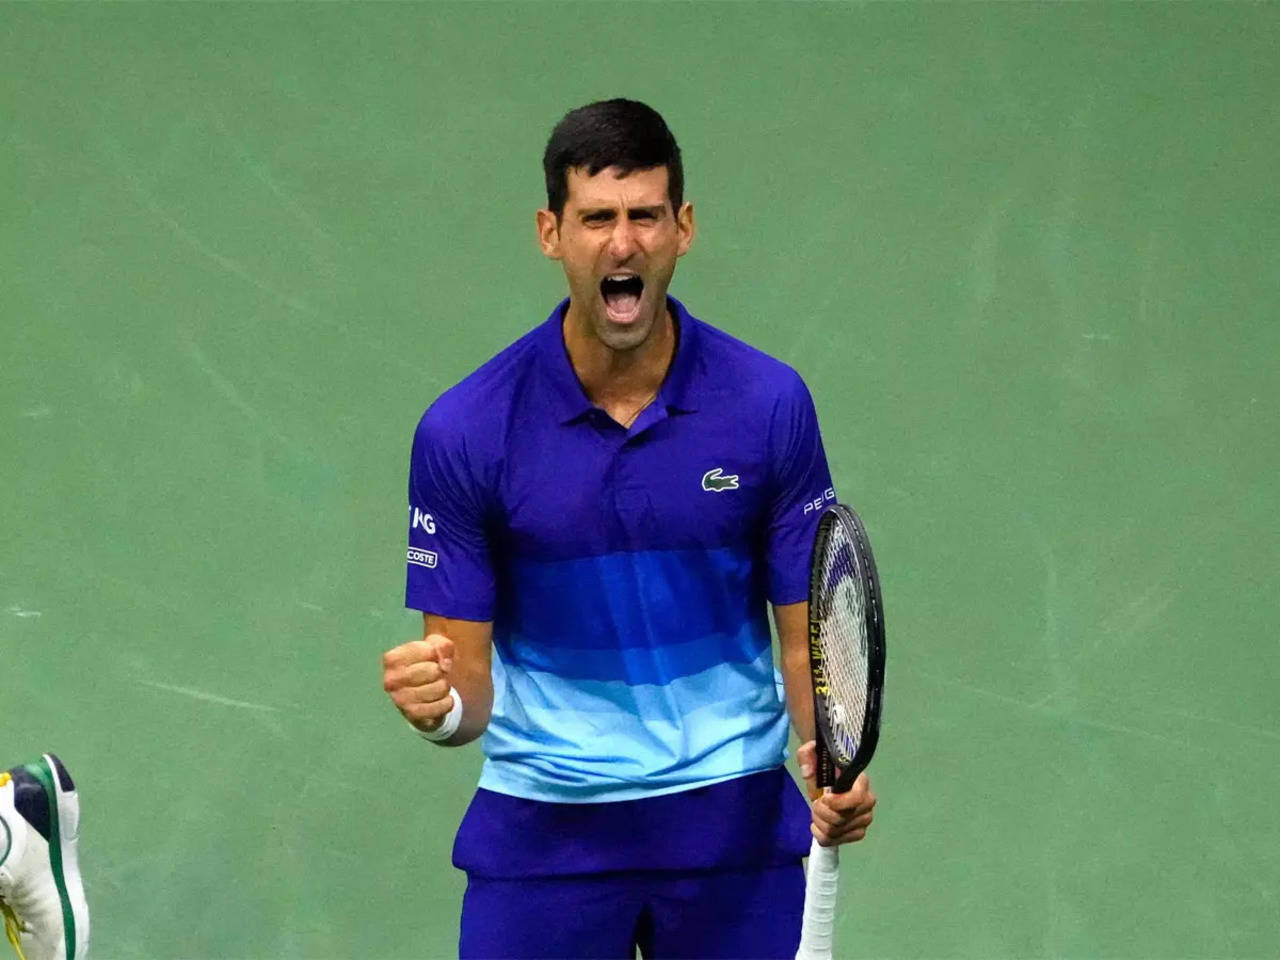 On verge of surpassing Roger Federer and Rafael Nadal, Novak Djokovic still  not No. 1 in fans' hearts | Tennis News - Times of India